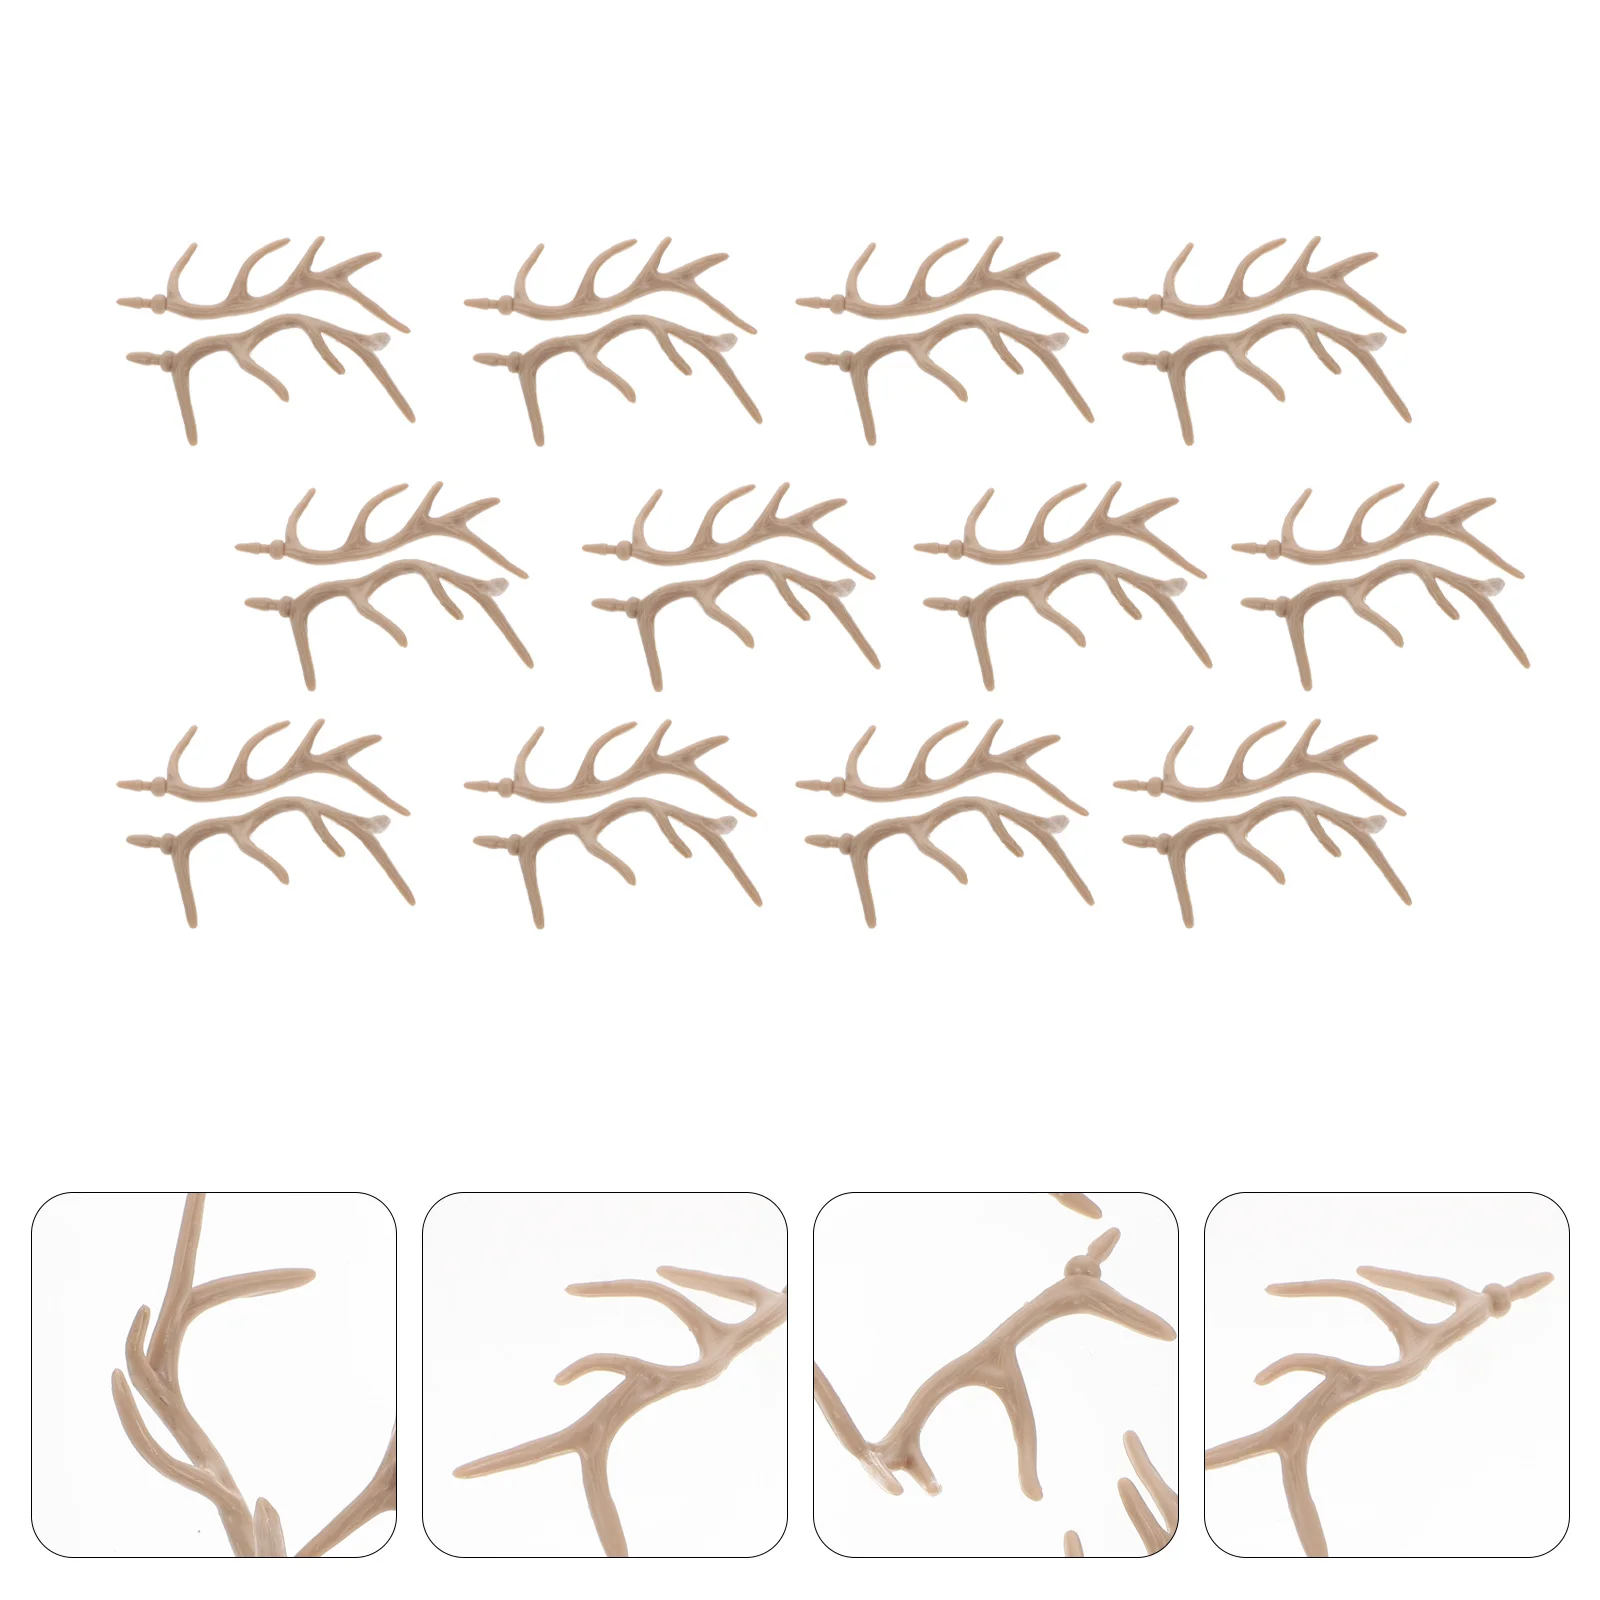 

12 Pairs of Deer Antlers Branch DIY Animals Horn Headband Christmas Home Decoration Xmas Gift